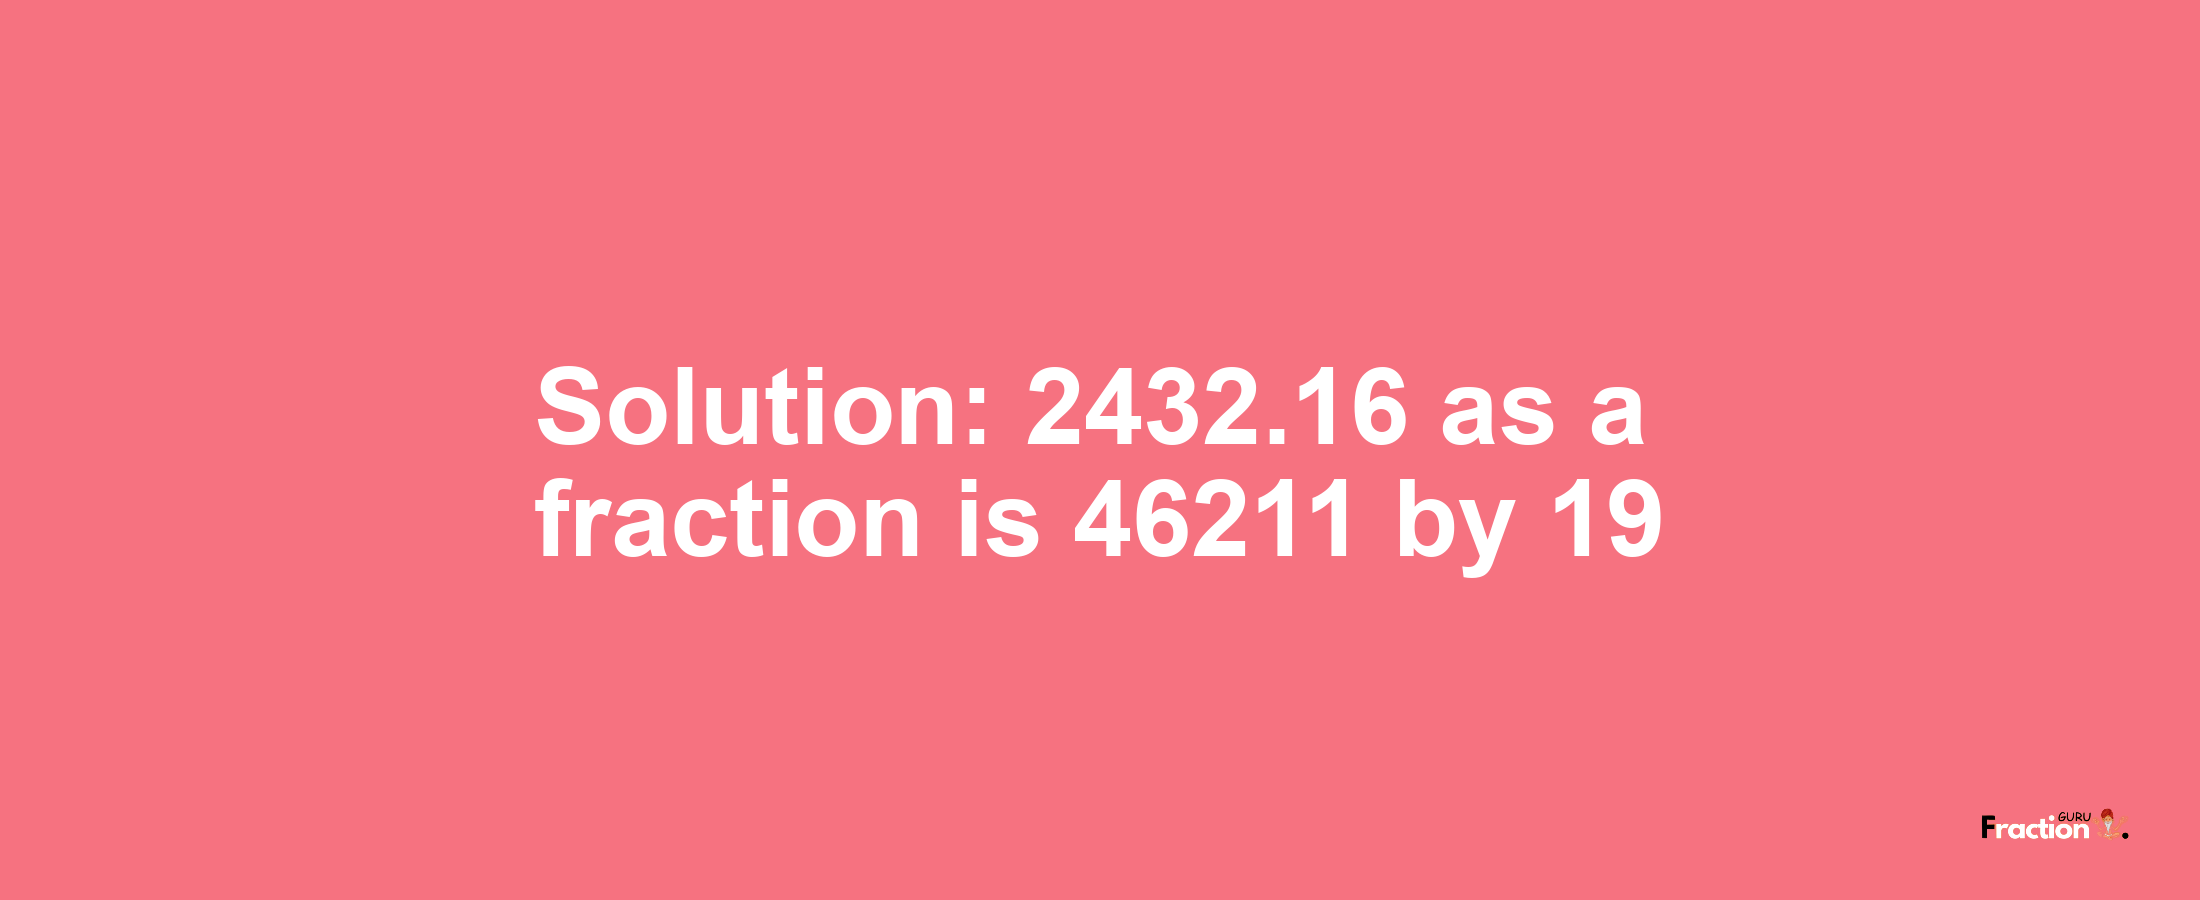 Solution:2432.16 as a fraction is 46211/19